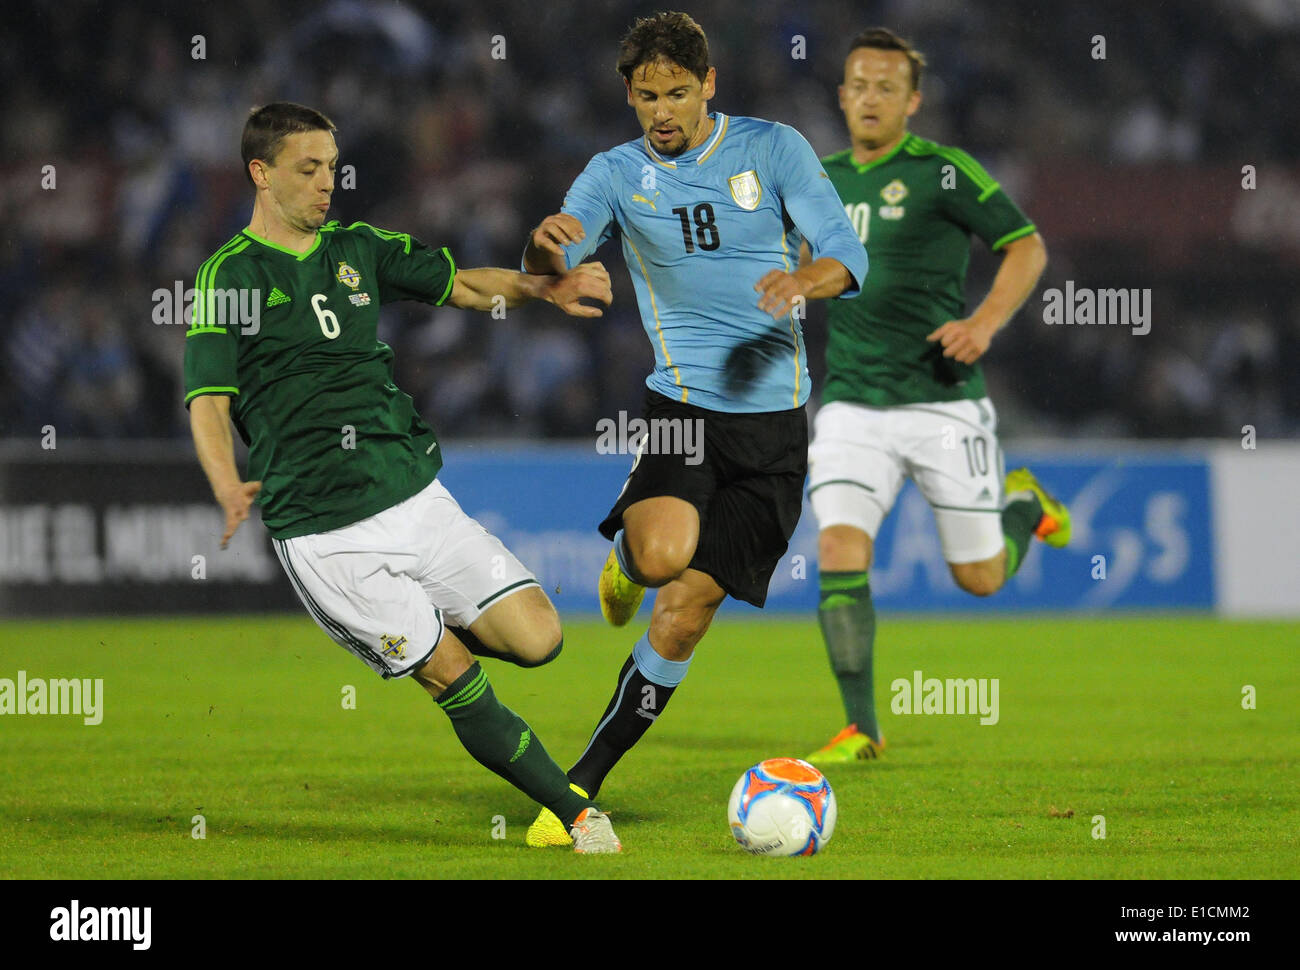 (140531) -- MONTEVIDEO, May 31, 2014 (Xinhua) -- Gaston Ramirez (C) of Uruguay vies for the ball with Christopher Baird (L) of North Ireland during a friendly match at Centenario Stadium, in Montevideo, capital of Uruguay, on May 30, 2014.   (Xinhua/Nicolas Celaya) (rh) Stock Photo